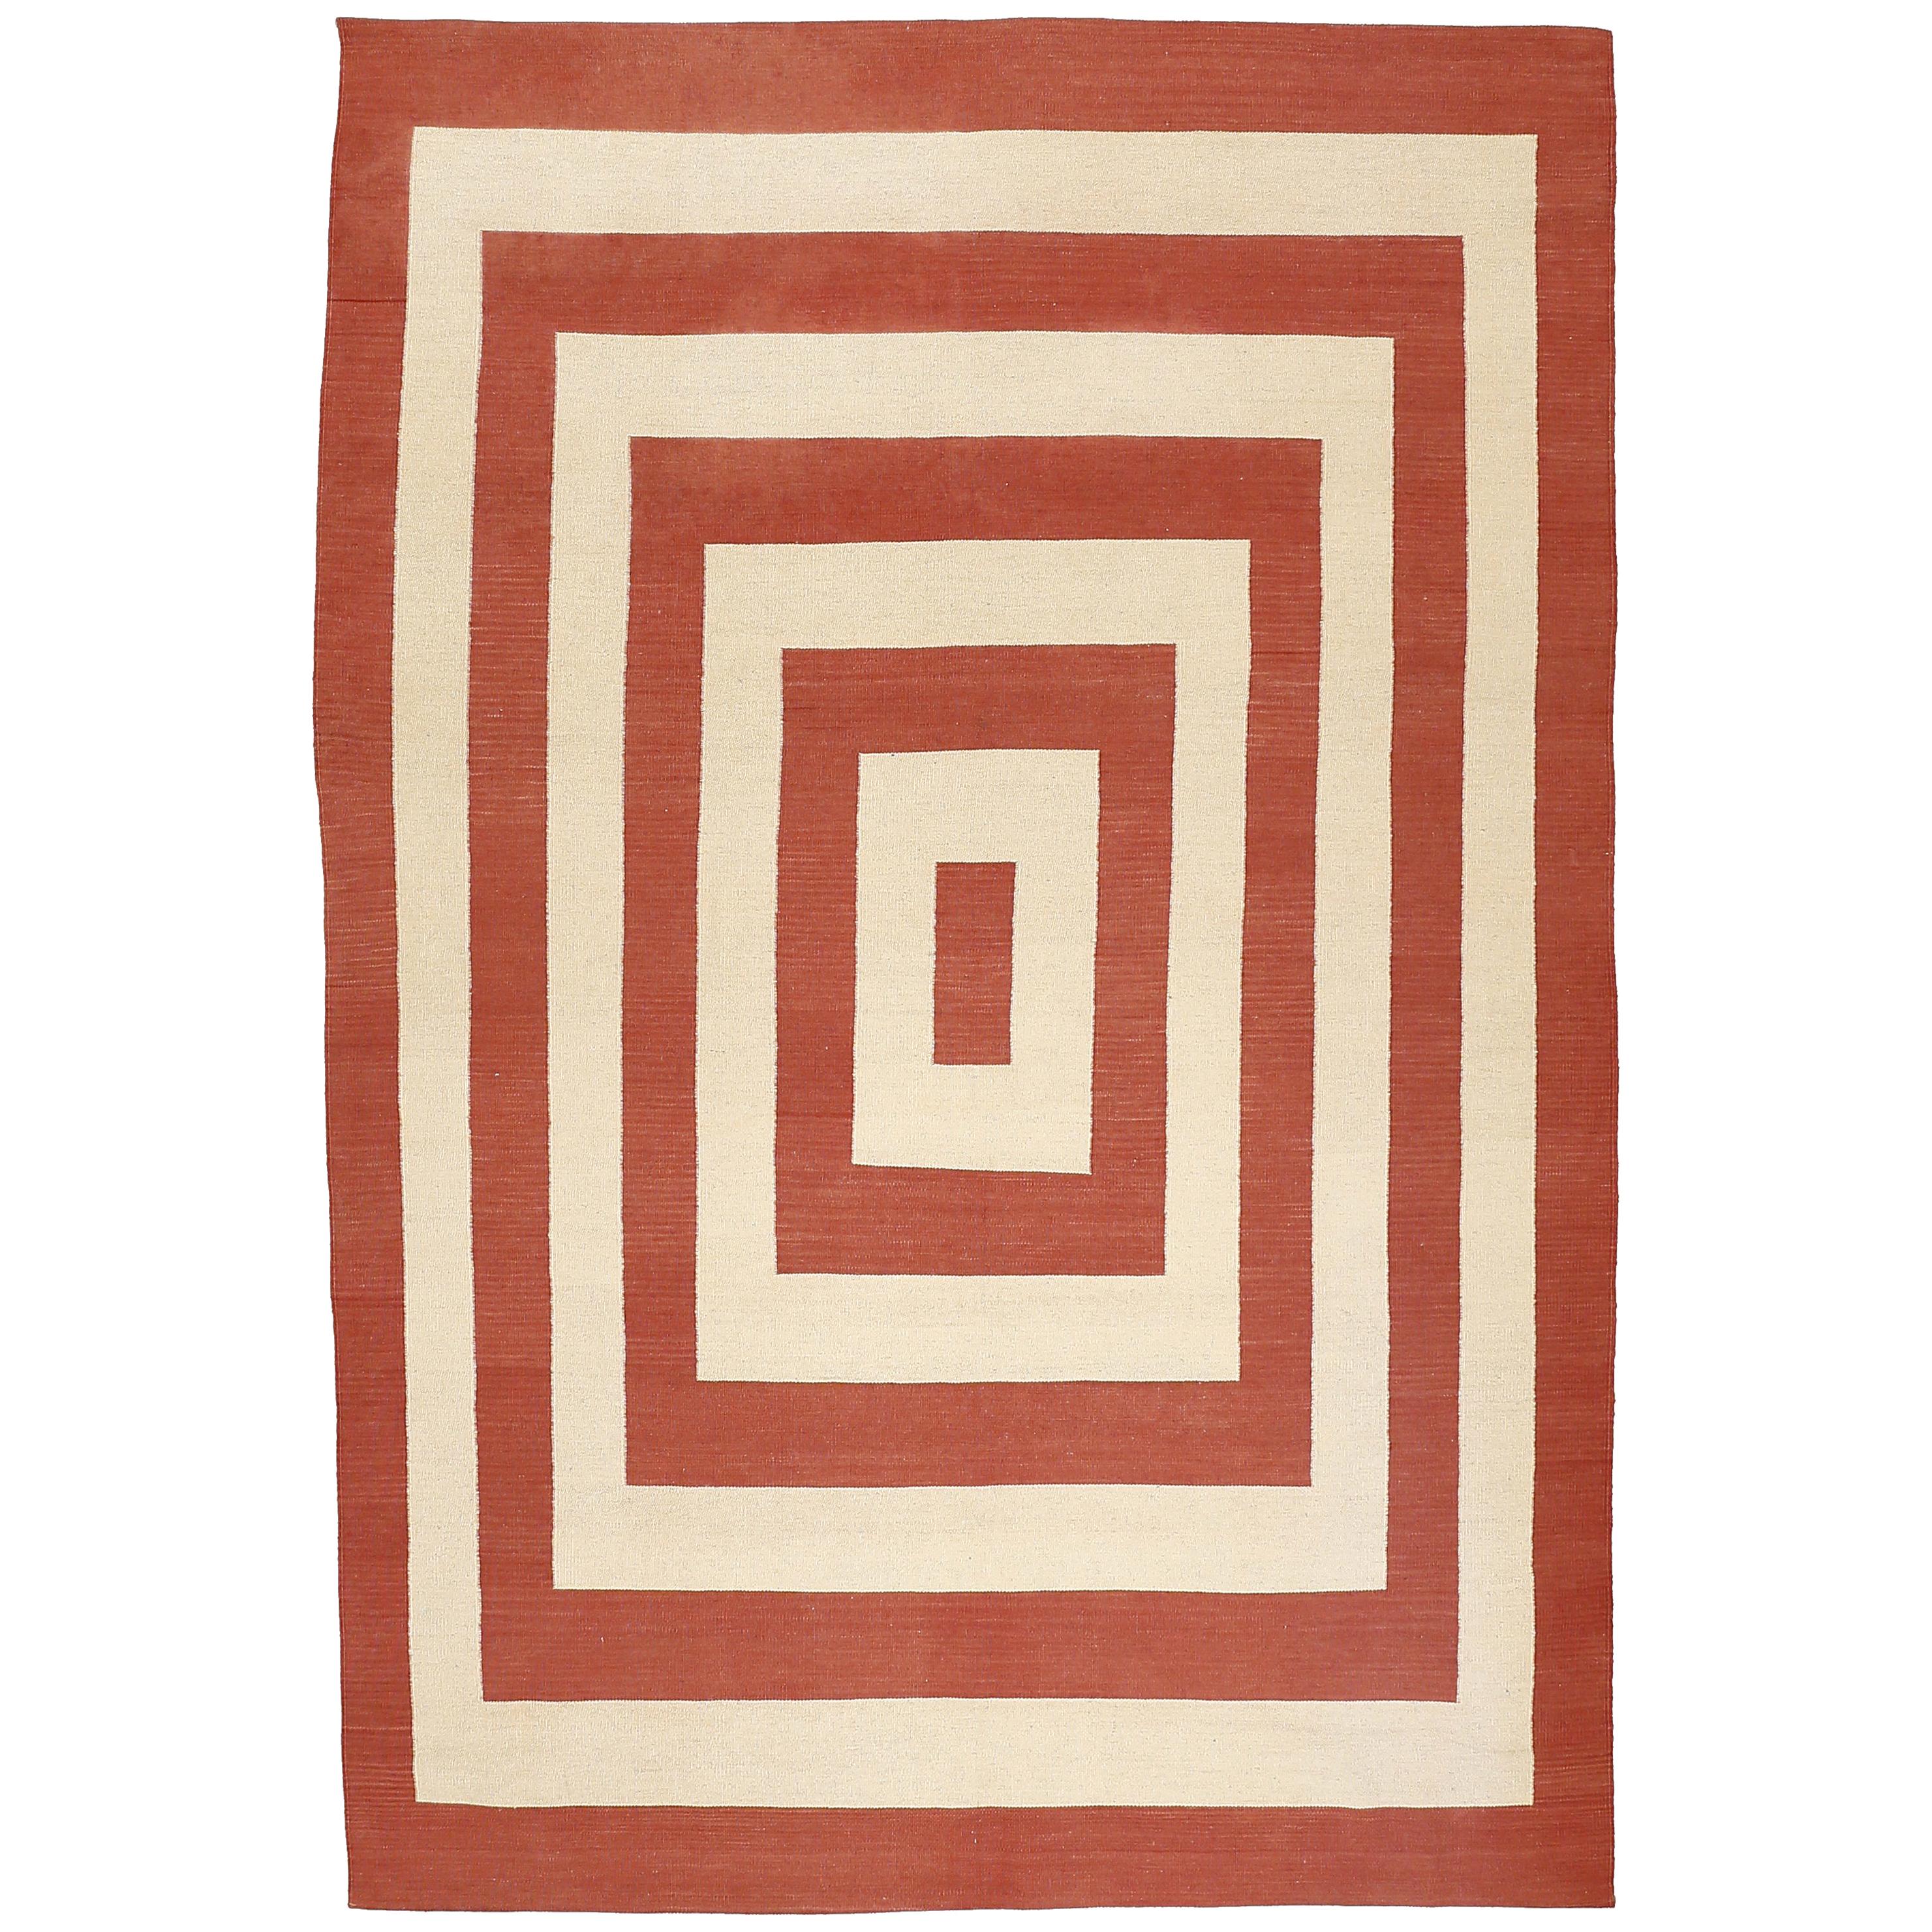 Modernist Design Kilim Rug with Concentric Red Rectangles on an Ivory Background For Sale